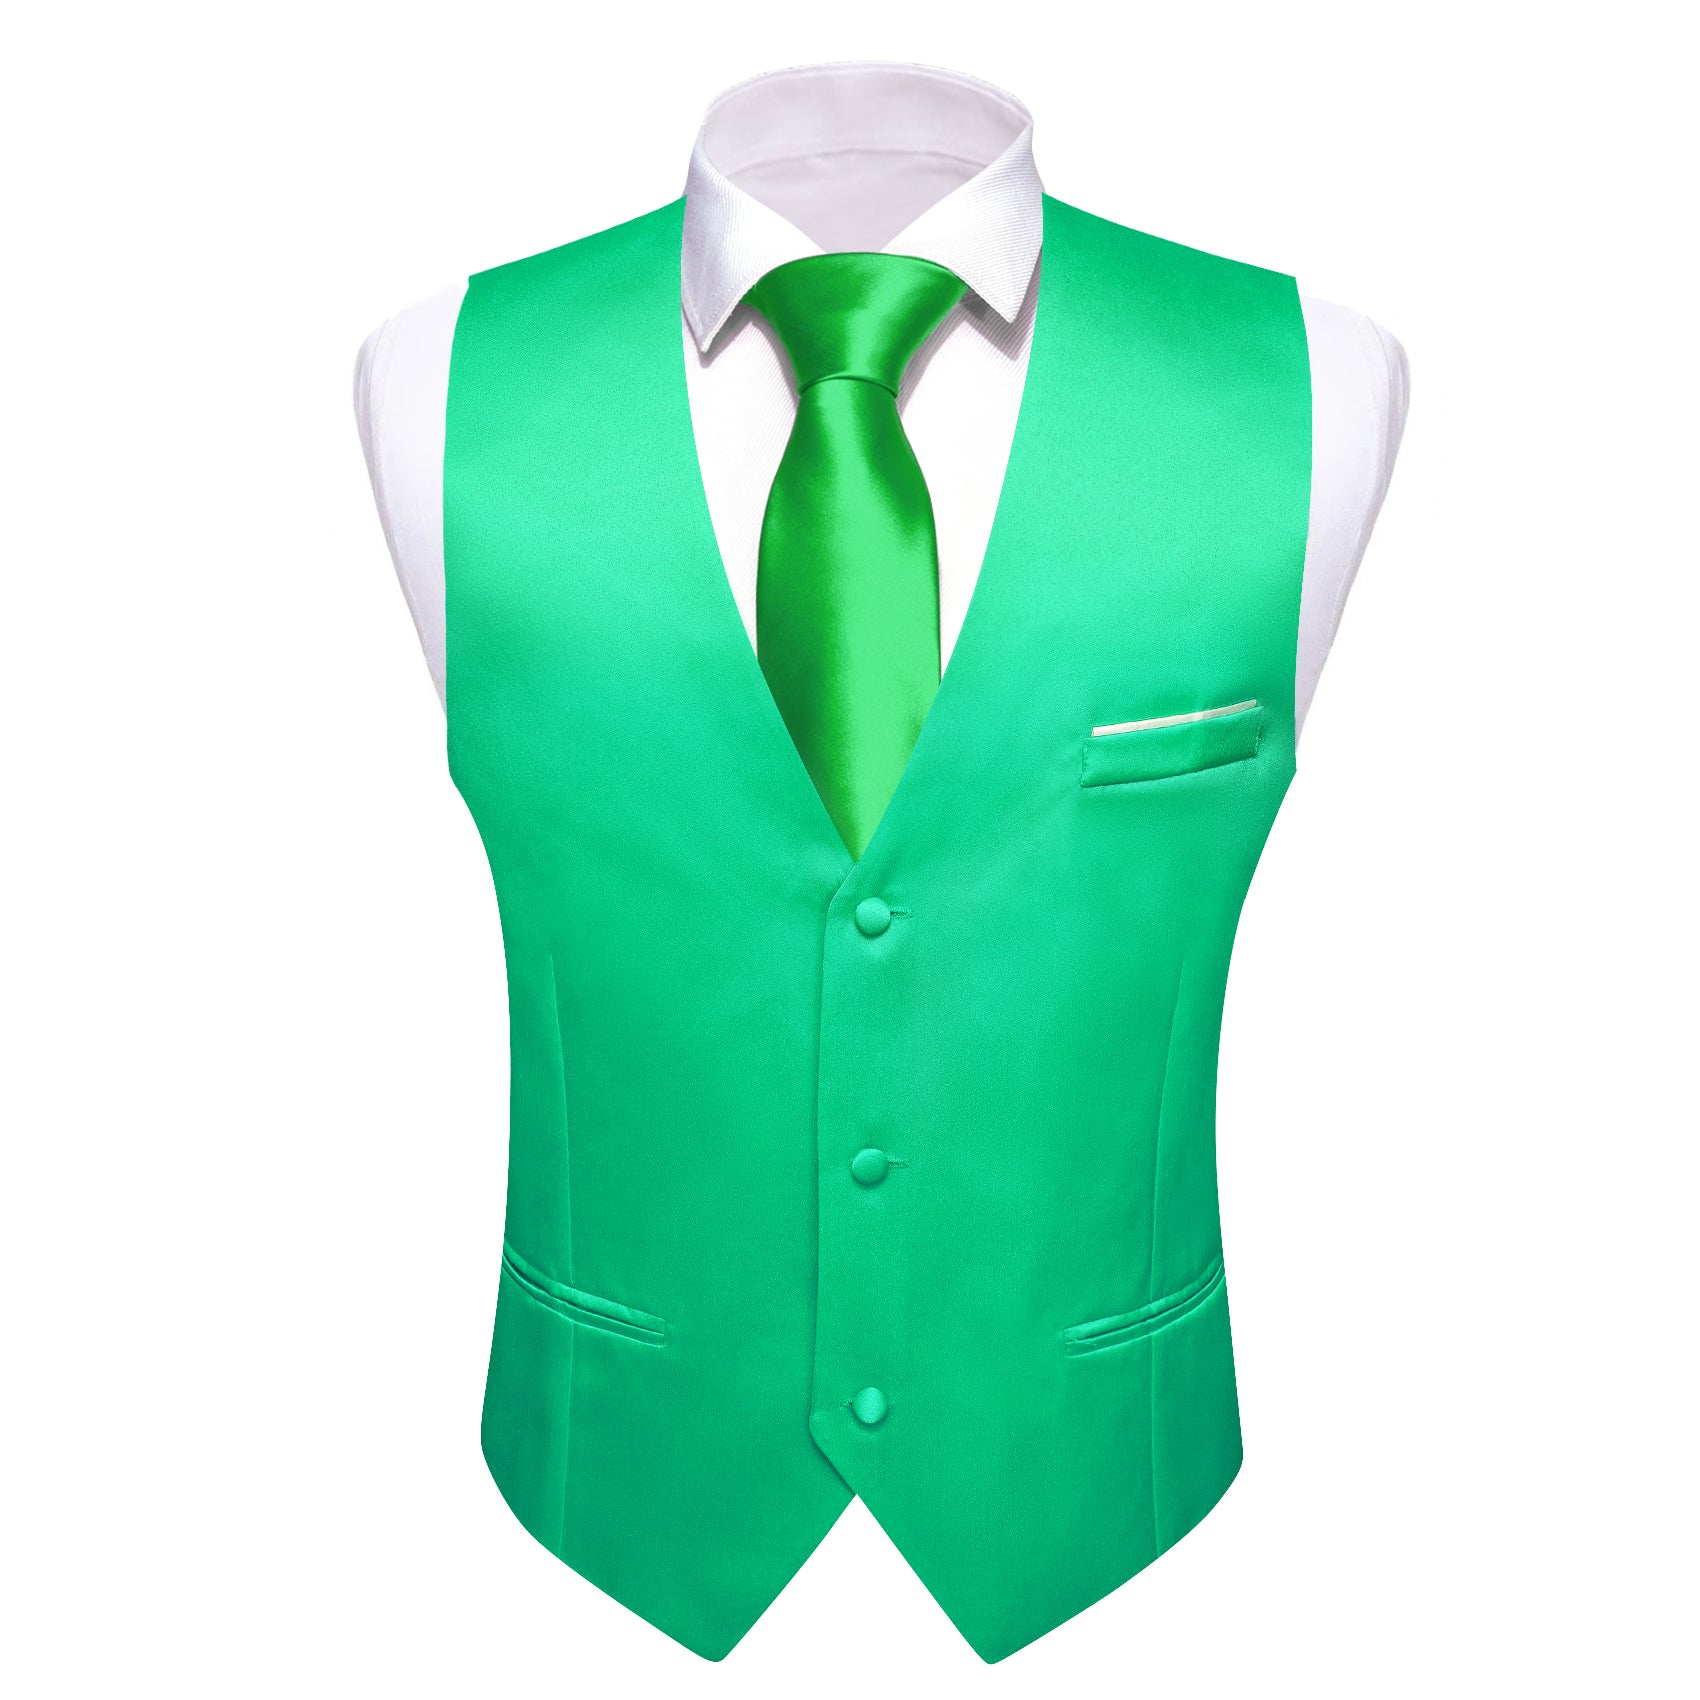 Barry.wang Green Solid Business Vest Suit